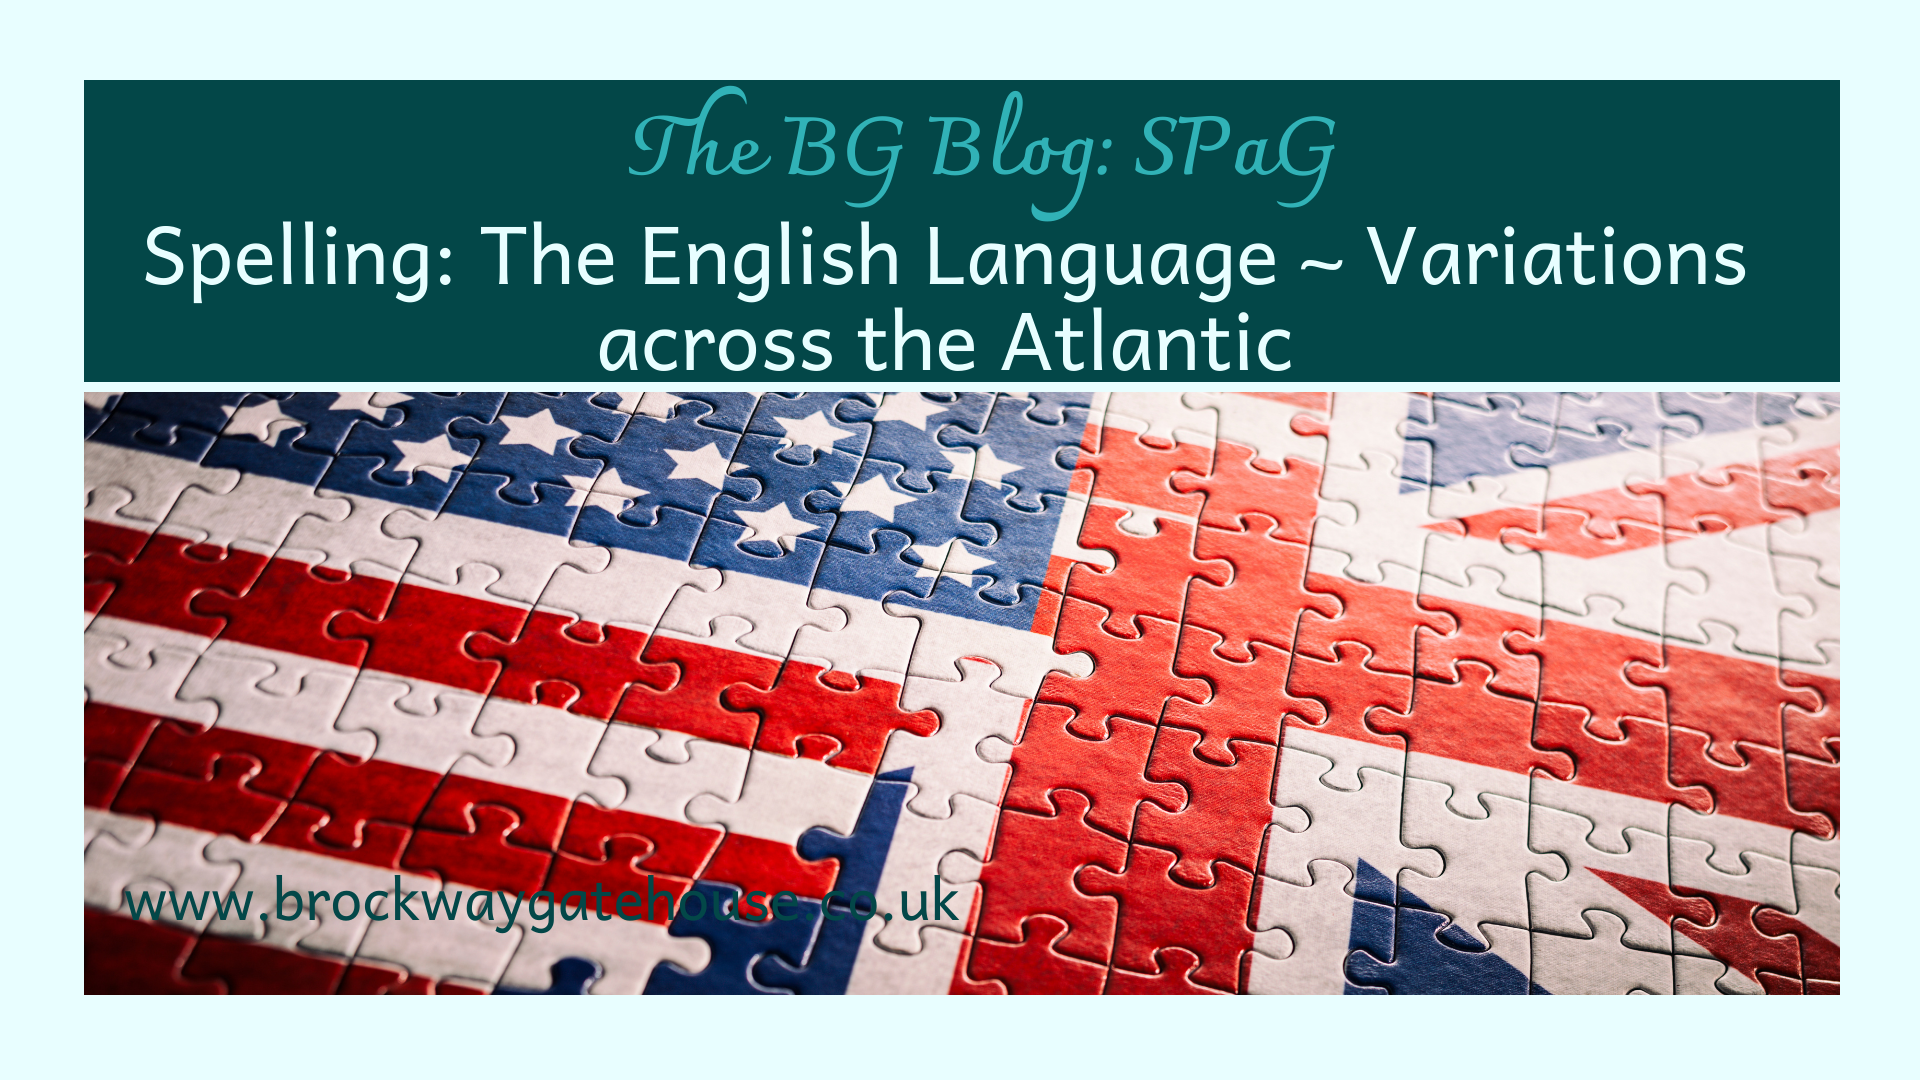 SPaG: Spelling The English Language ~ Variations across the Atlantic